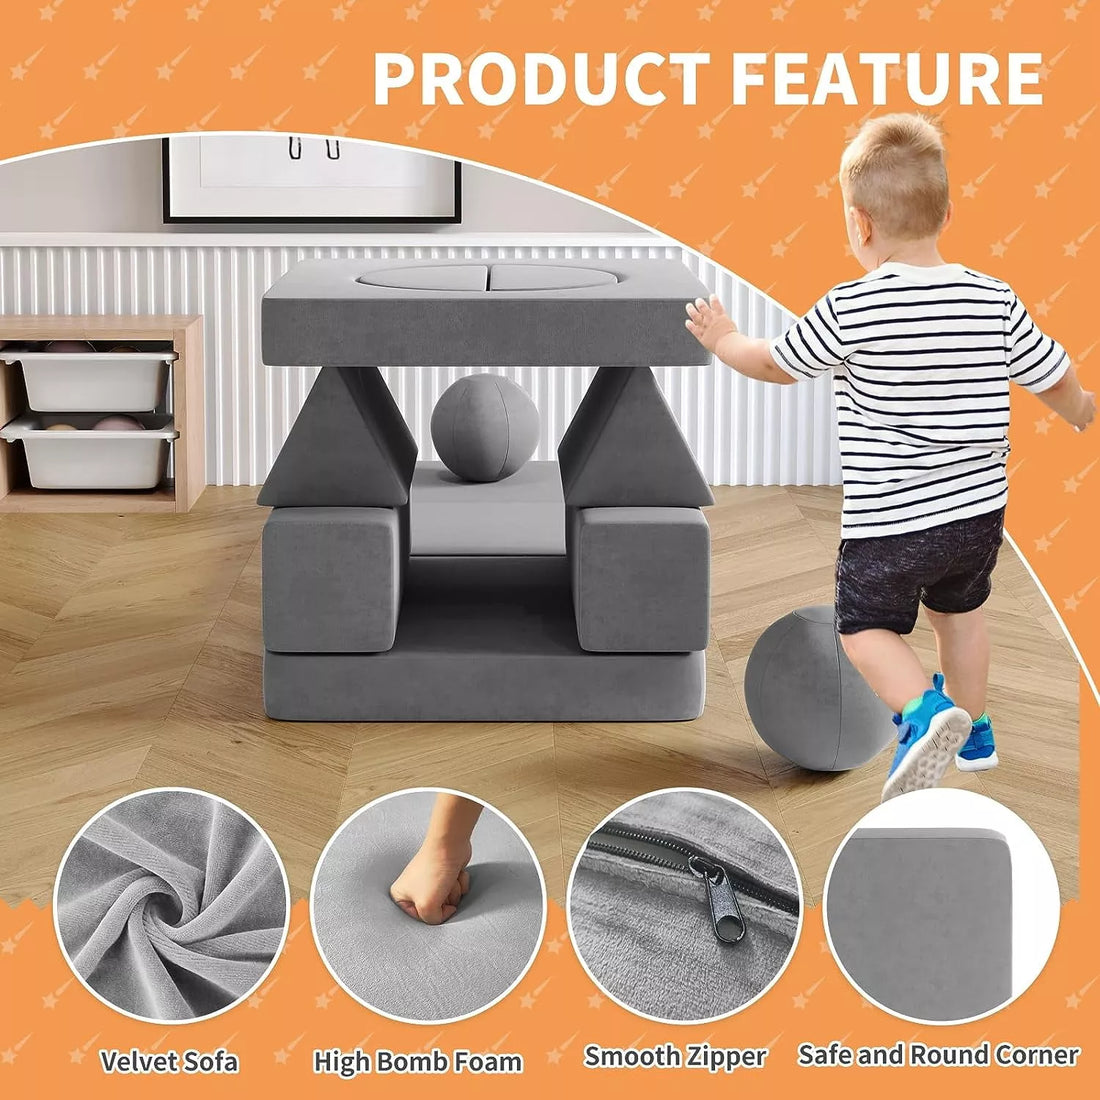 12Pcs Kids Couch, Toddler Couch with 2 Balls and Tunnel, Modular Kids Play Couch for Playroom, Fold Out Kids Sofa Couch for Kickball, Pitching Game, Creative Gameplay Sofa for Kids, Gray